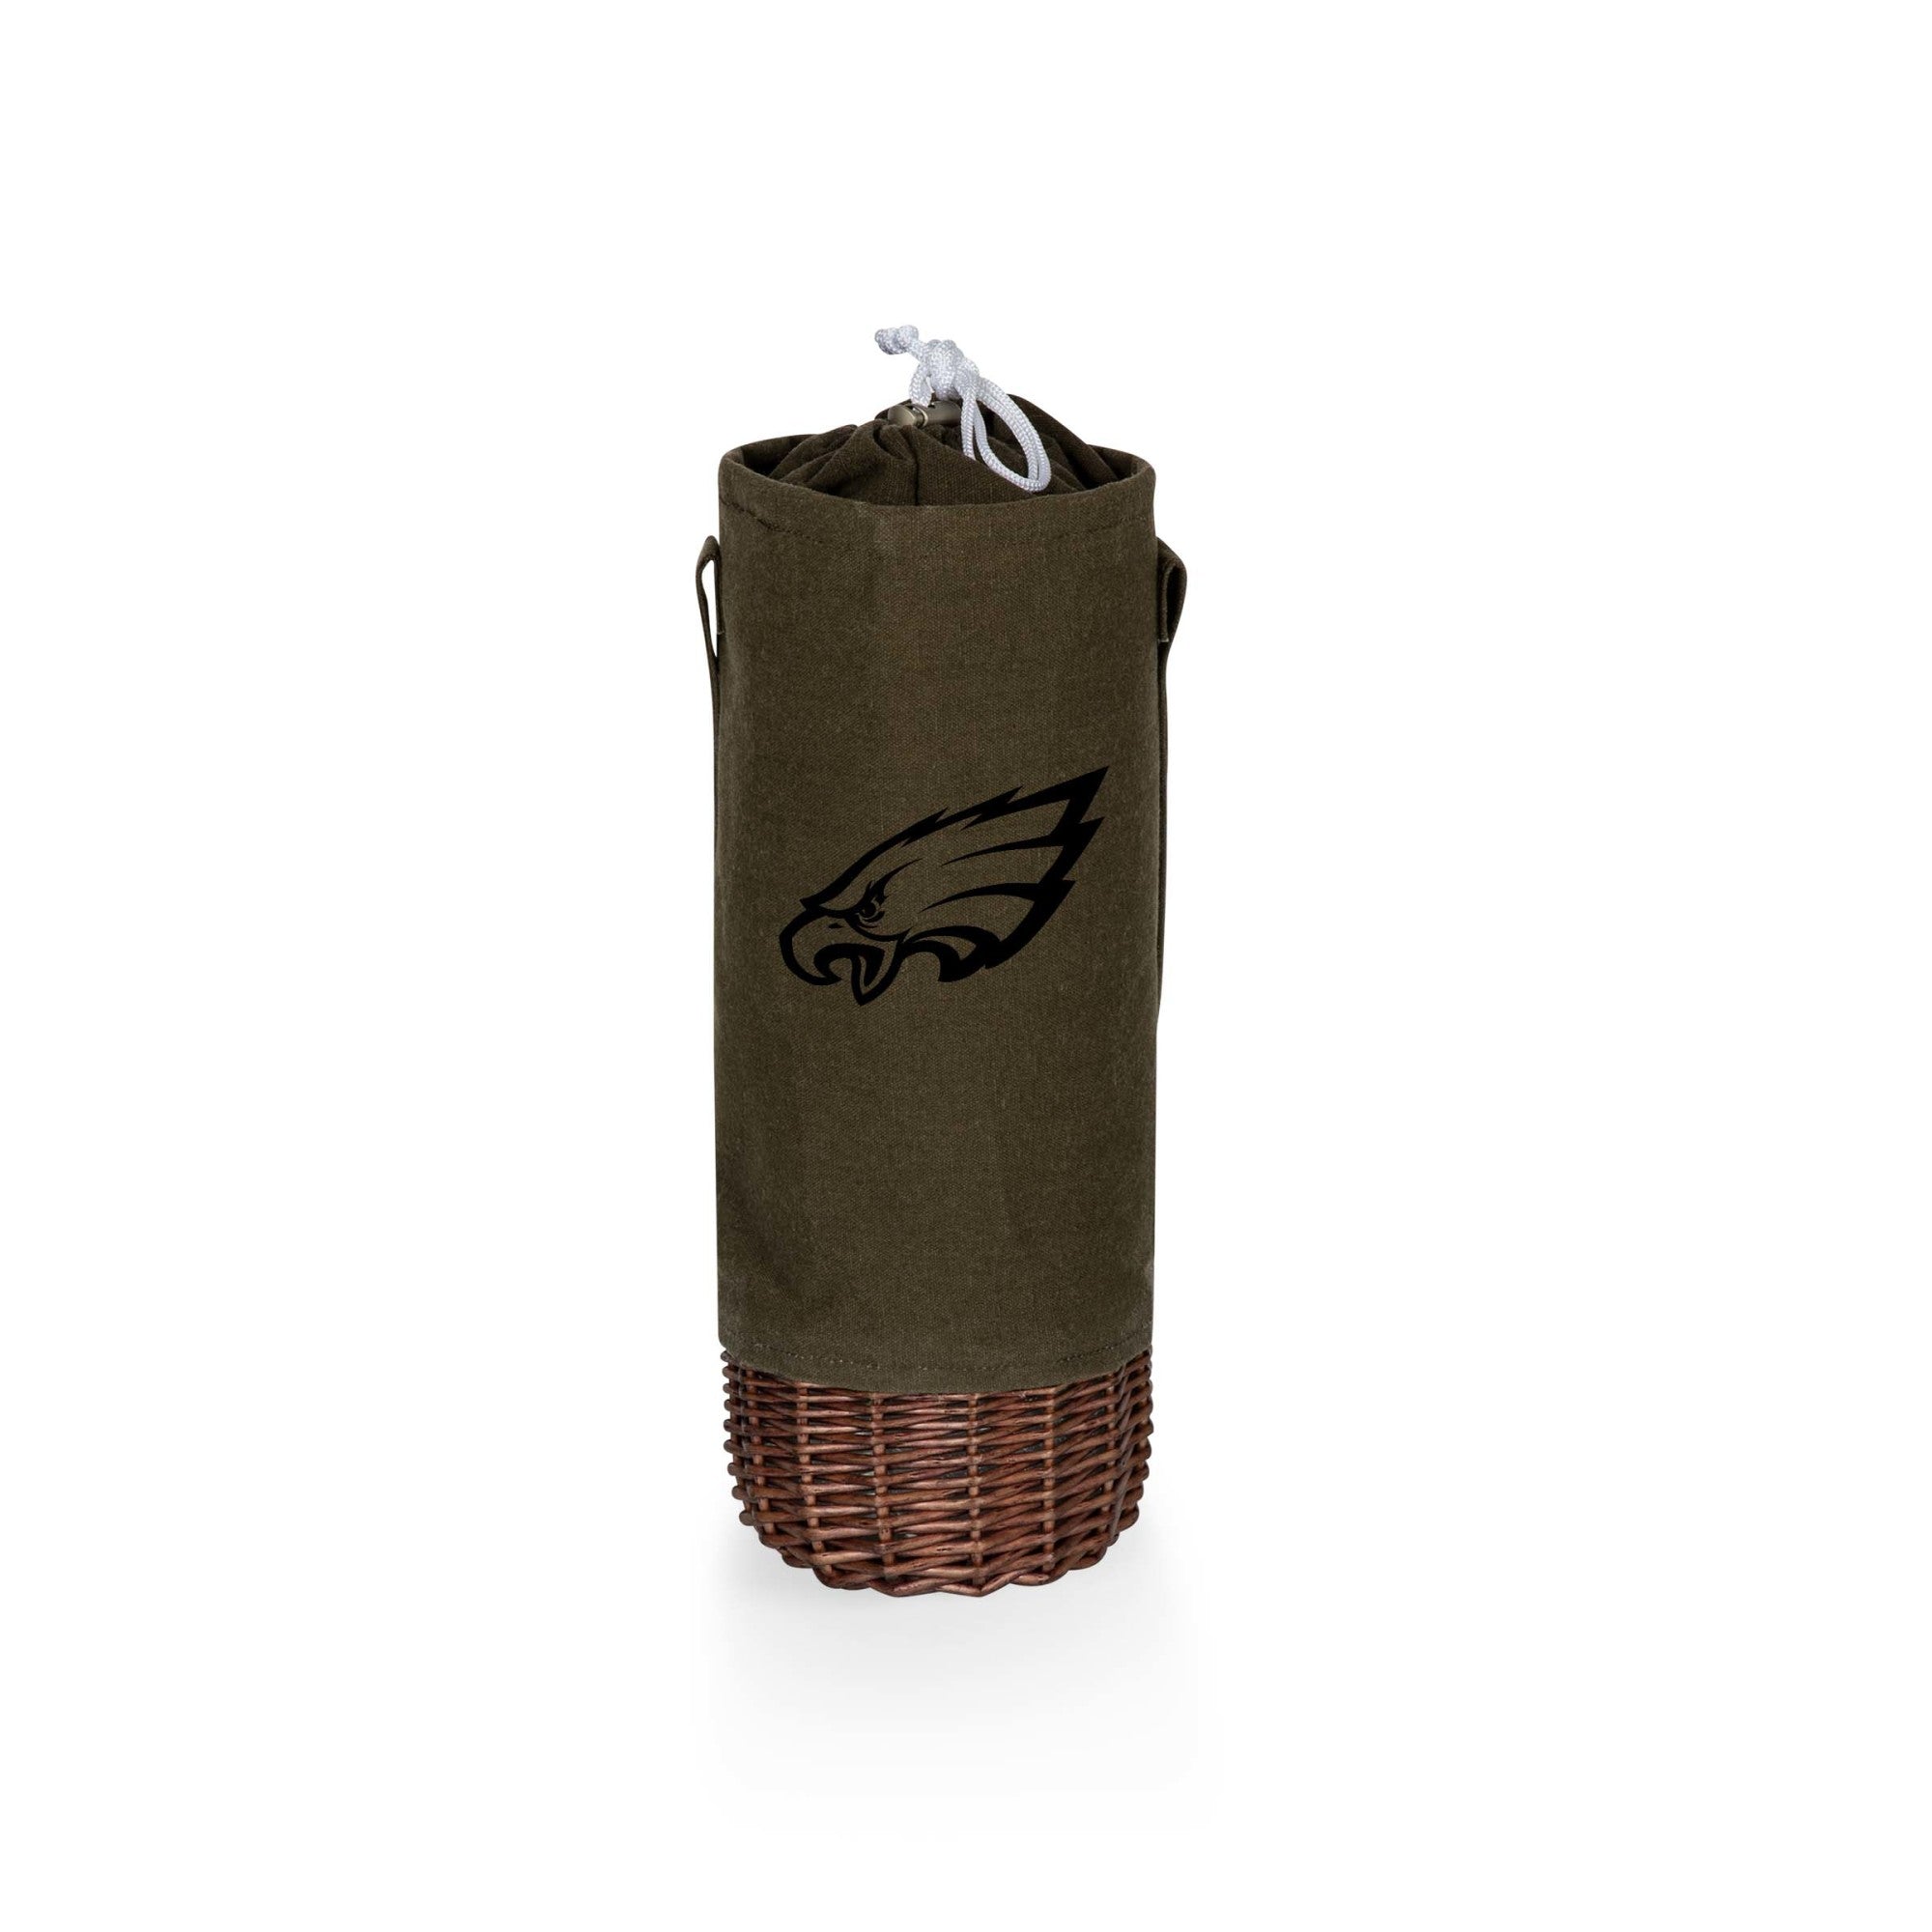 Philadelphia Eagles - Malbec Insulated Canvas and Willow Wine Bottle Basket